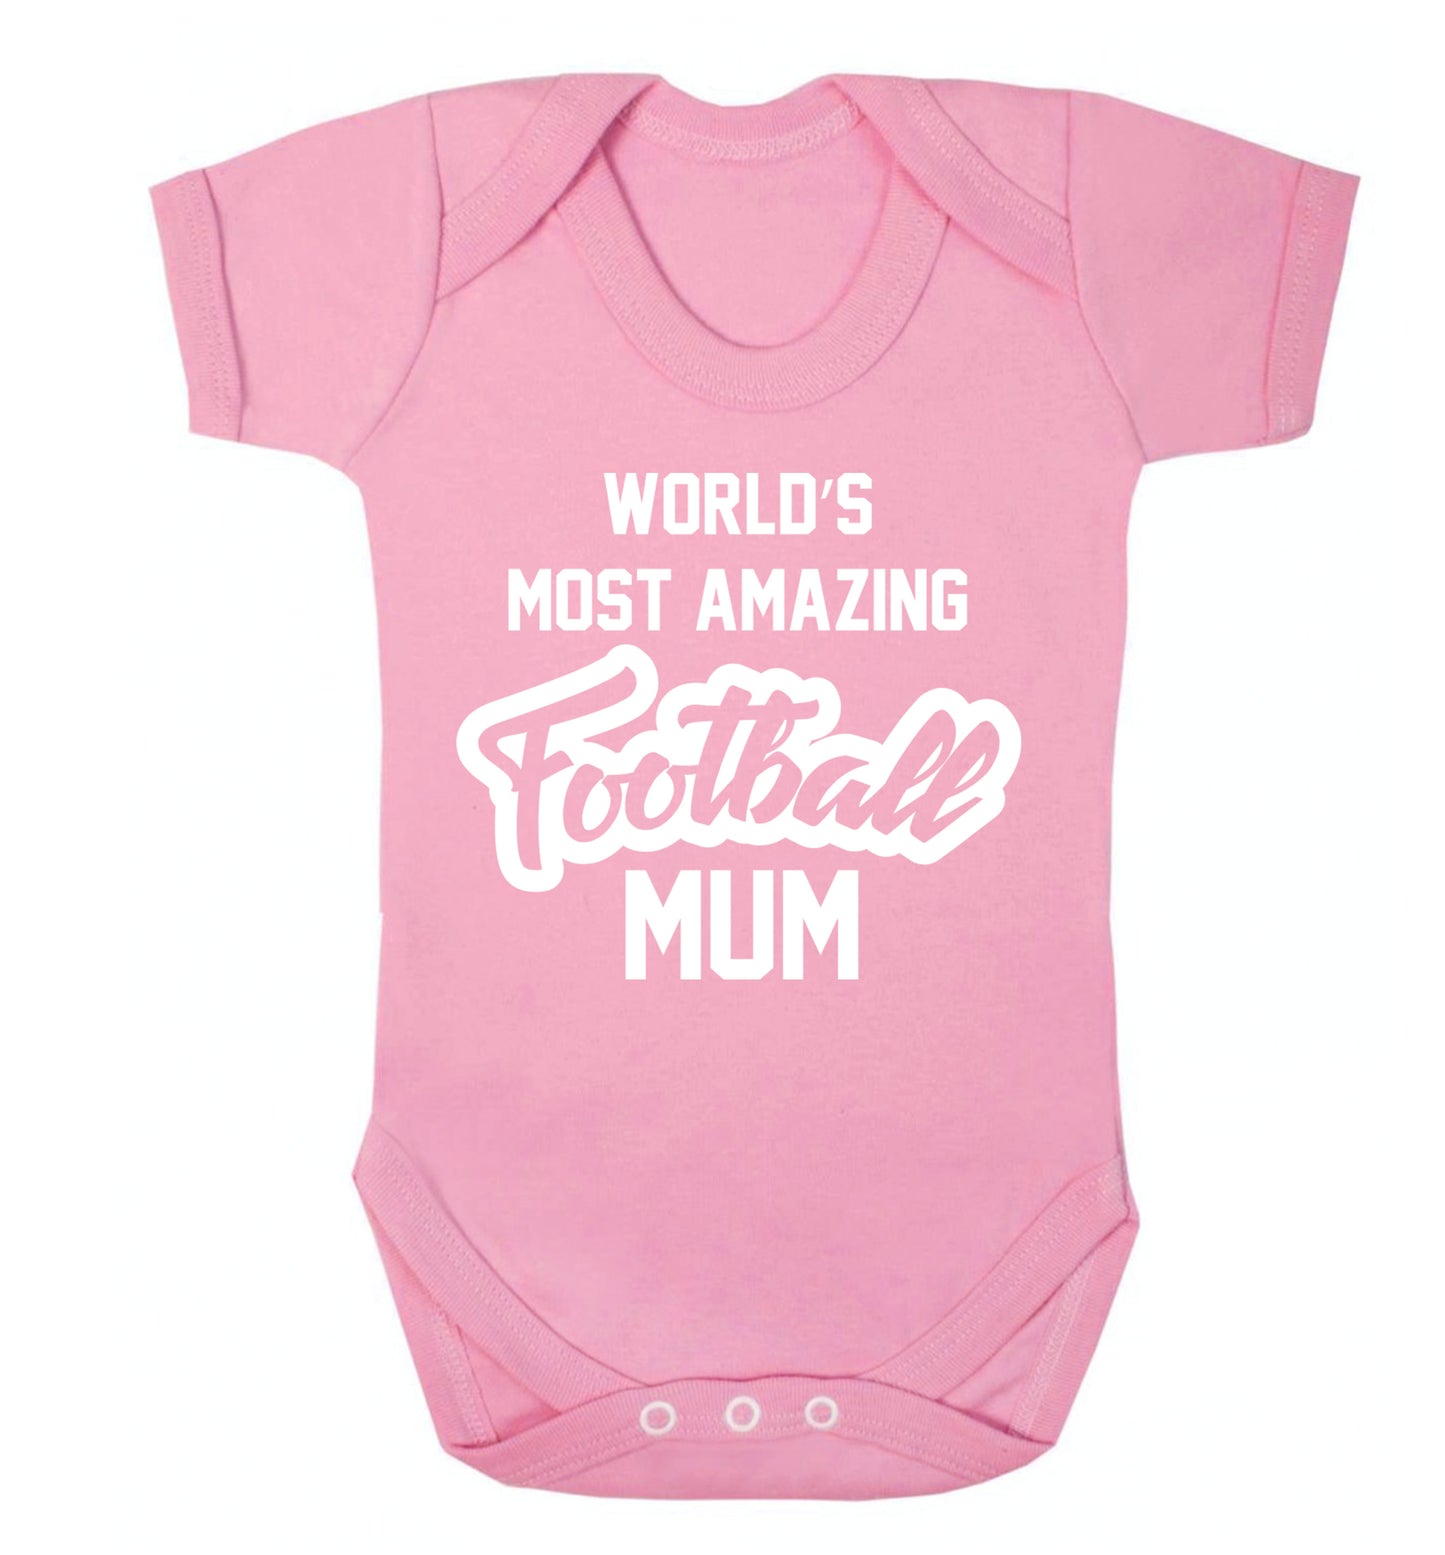 Worlds most amazing football mum Baby Vest pale pink 18-24 months